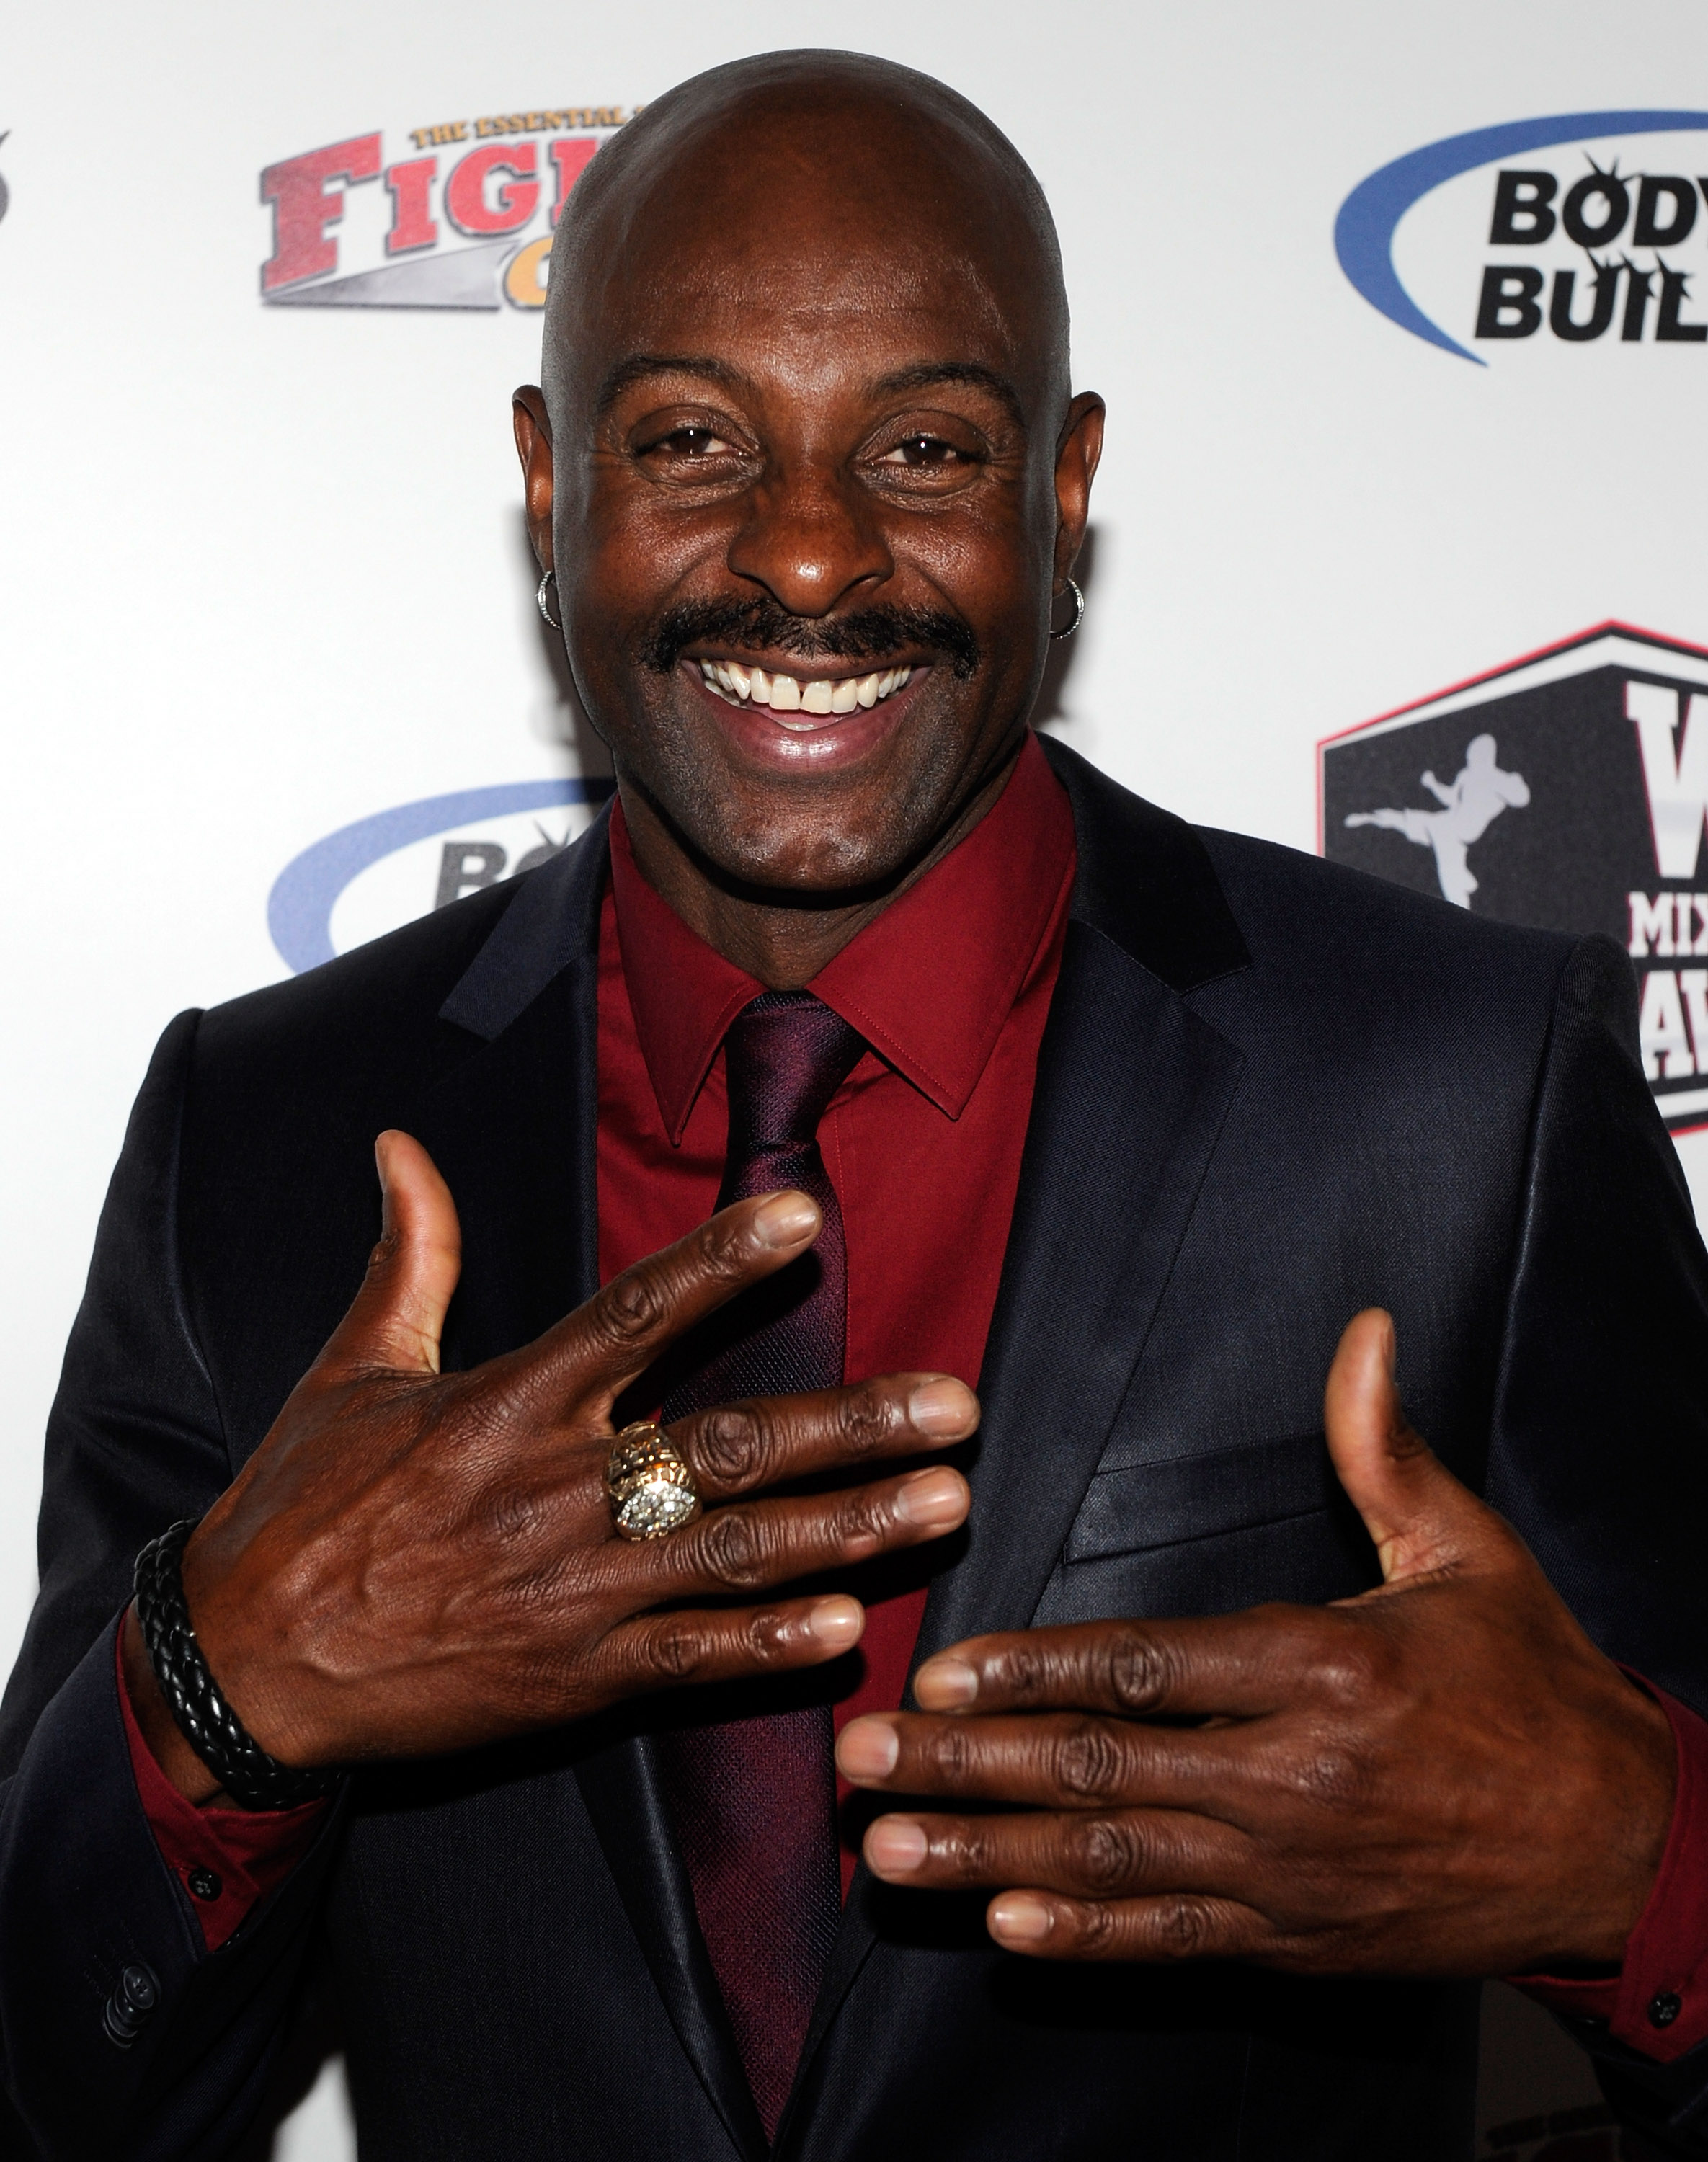 LAS VEGAS, NV - DECEMBER 01:  Retired Hall of Fame National Football League player Jerry Rice arrives at the third annual Fighters Only World Mixed Martial Arts Awards 2010 at the Palms Casino Resort December 1, 2010 in Las Vegas, Nevada.  (Photo by Ethan